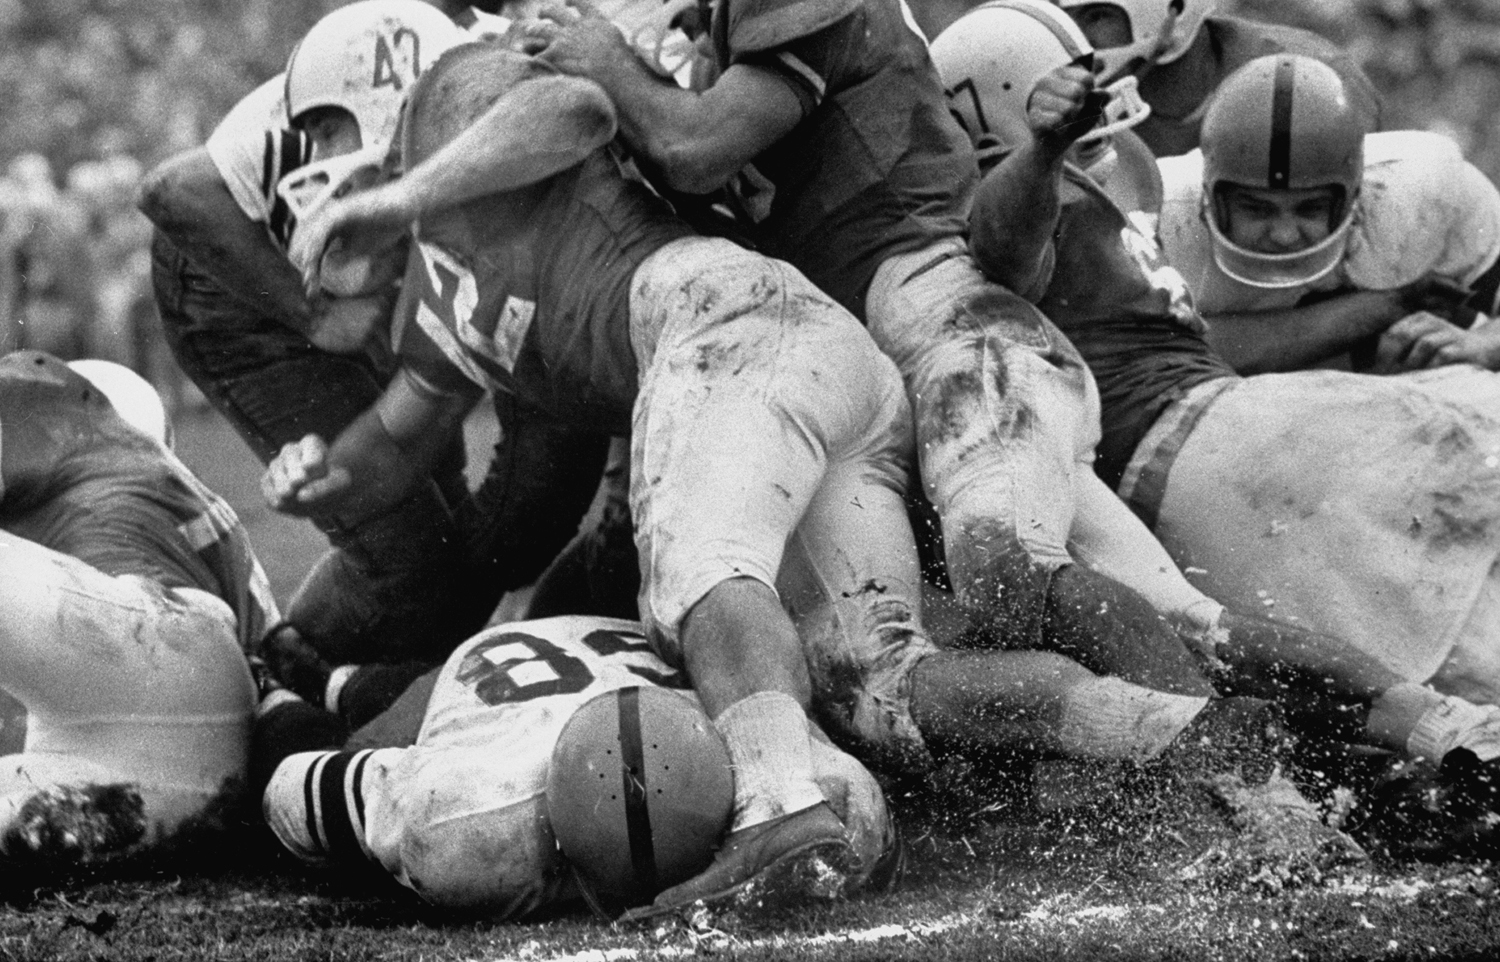 Syracuse (in white) vs. Texas in the 1960 Cotton Bowl. Syracuse won the game, 23-14.